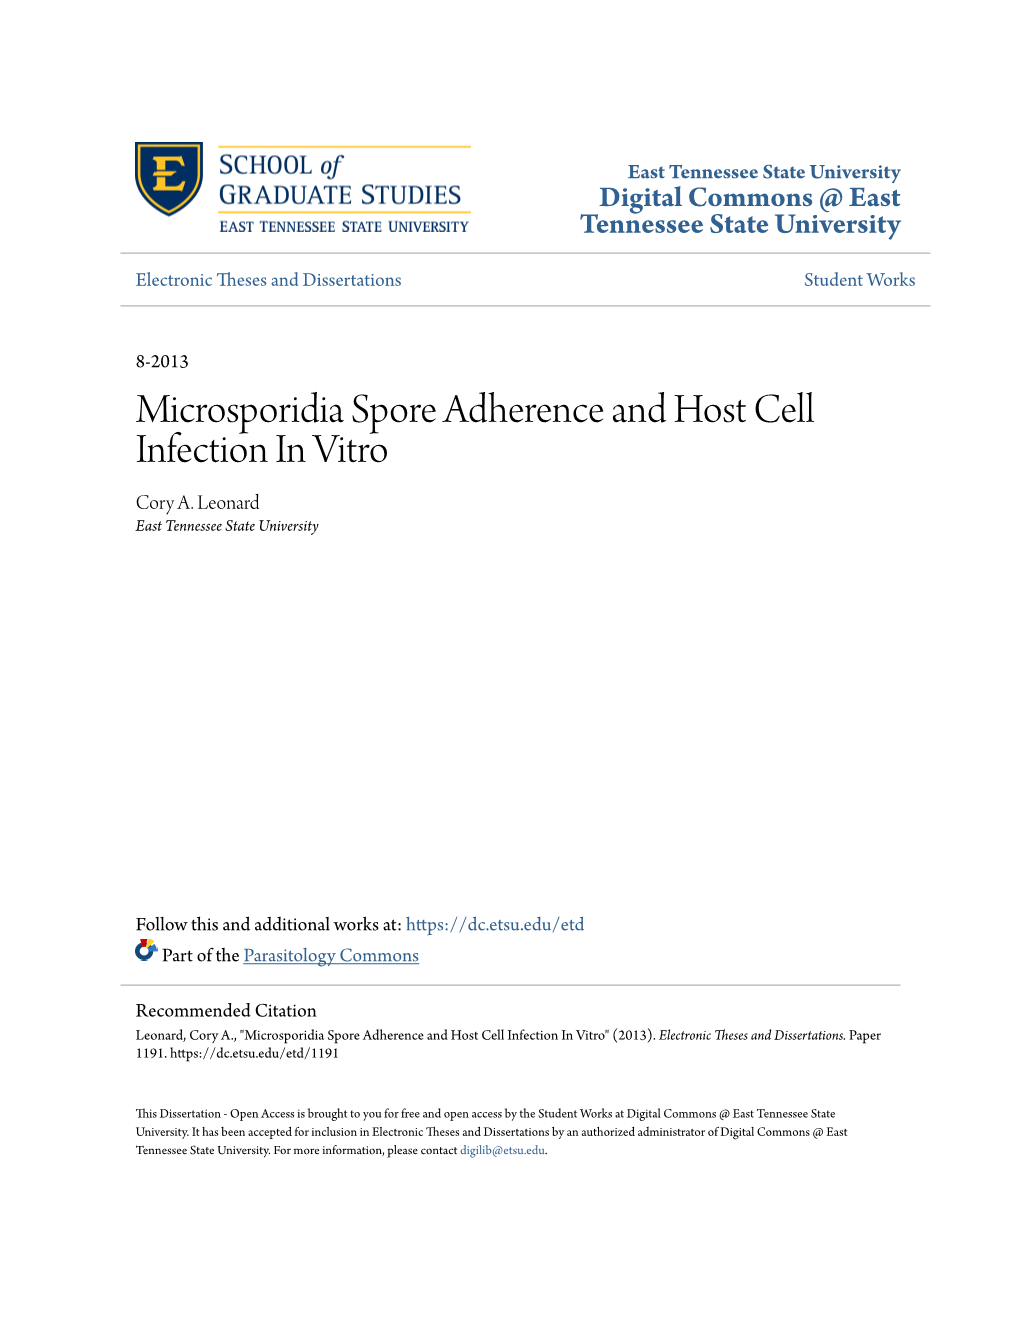 Microsporidia Spore Adherence and Host Cell Infection in Vitro Cory A